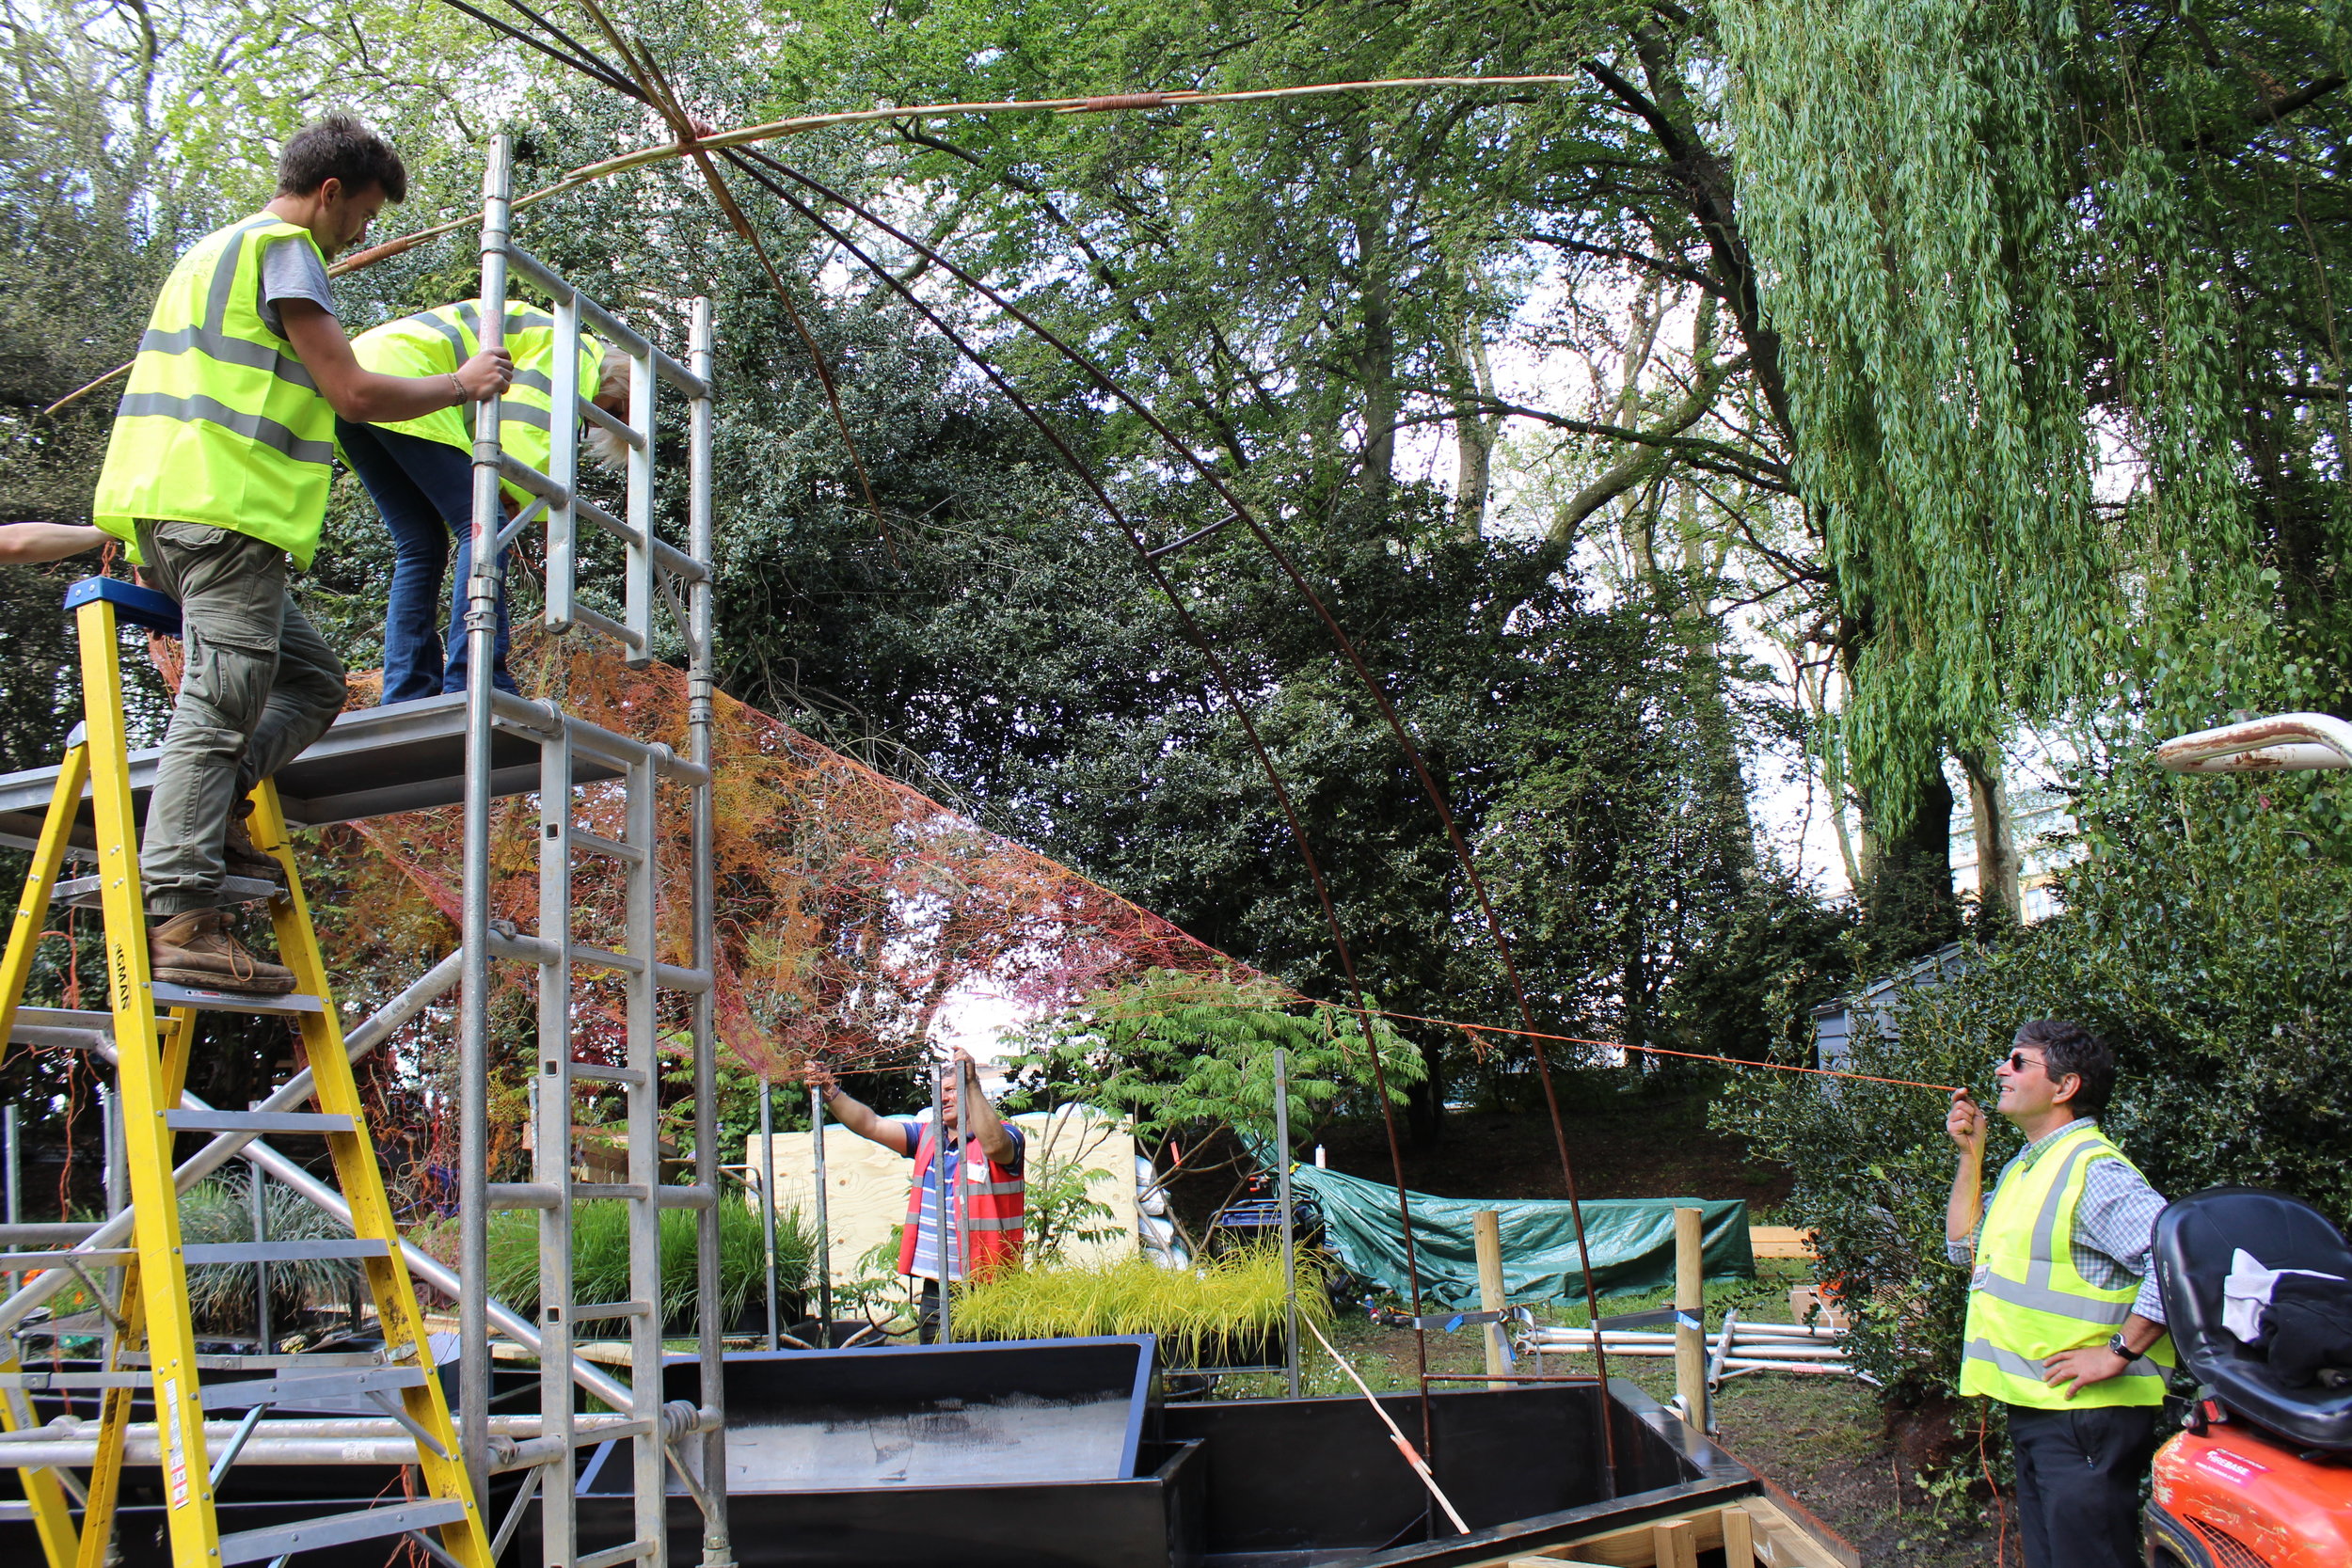 Installing canopy at Chelsea, May 15